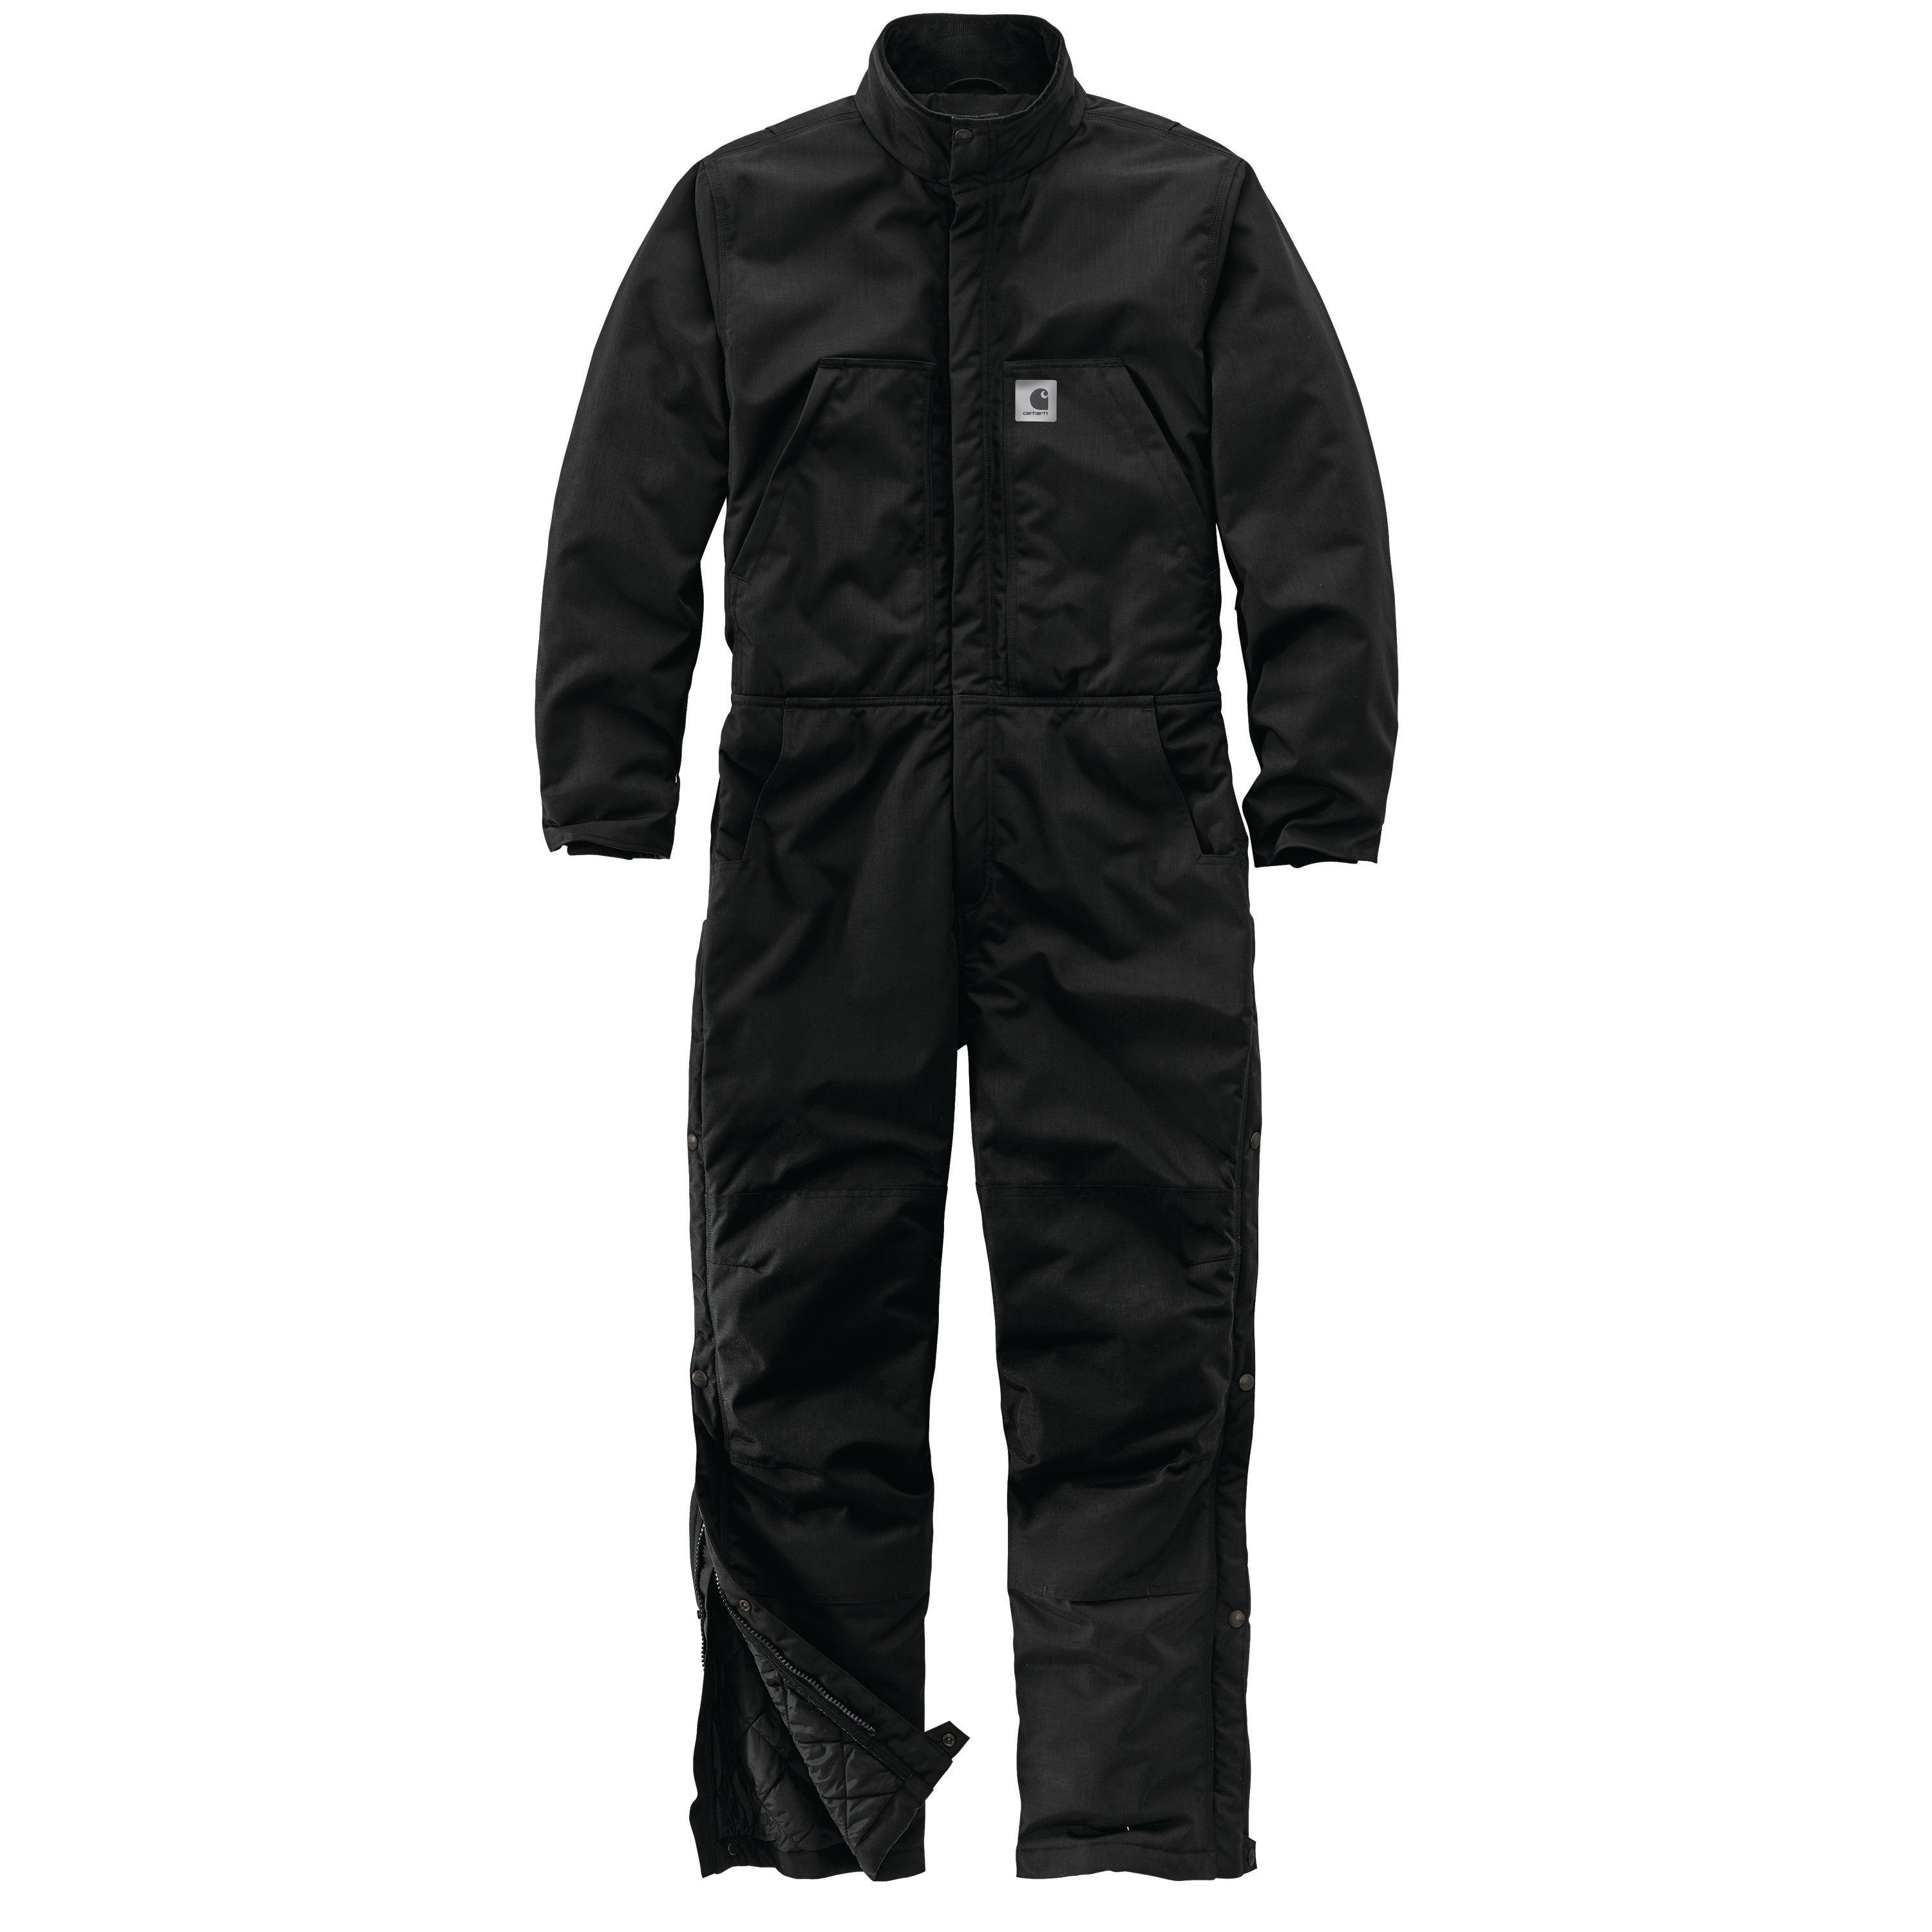 104464 - Carhartt Men's Yukon Extremes Insulated Coverall